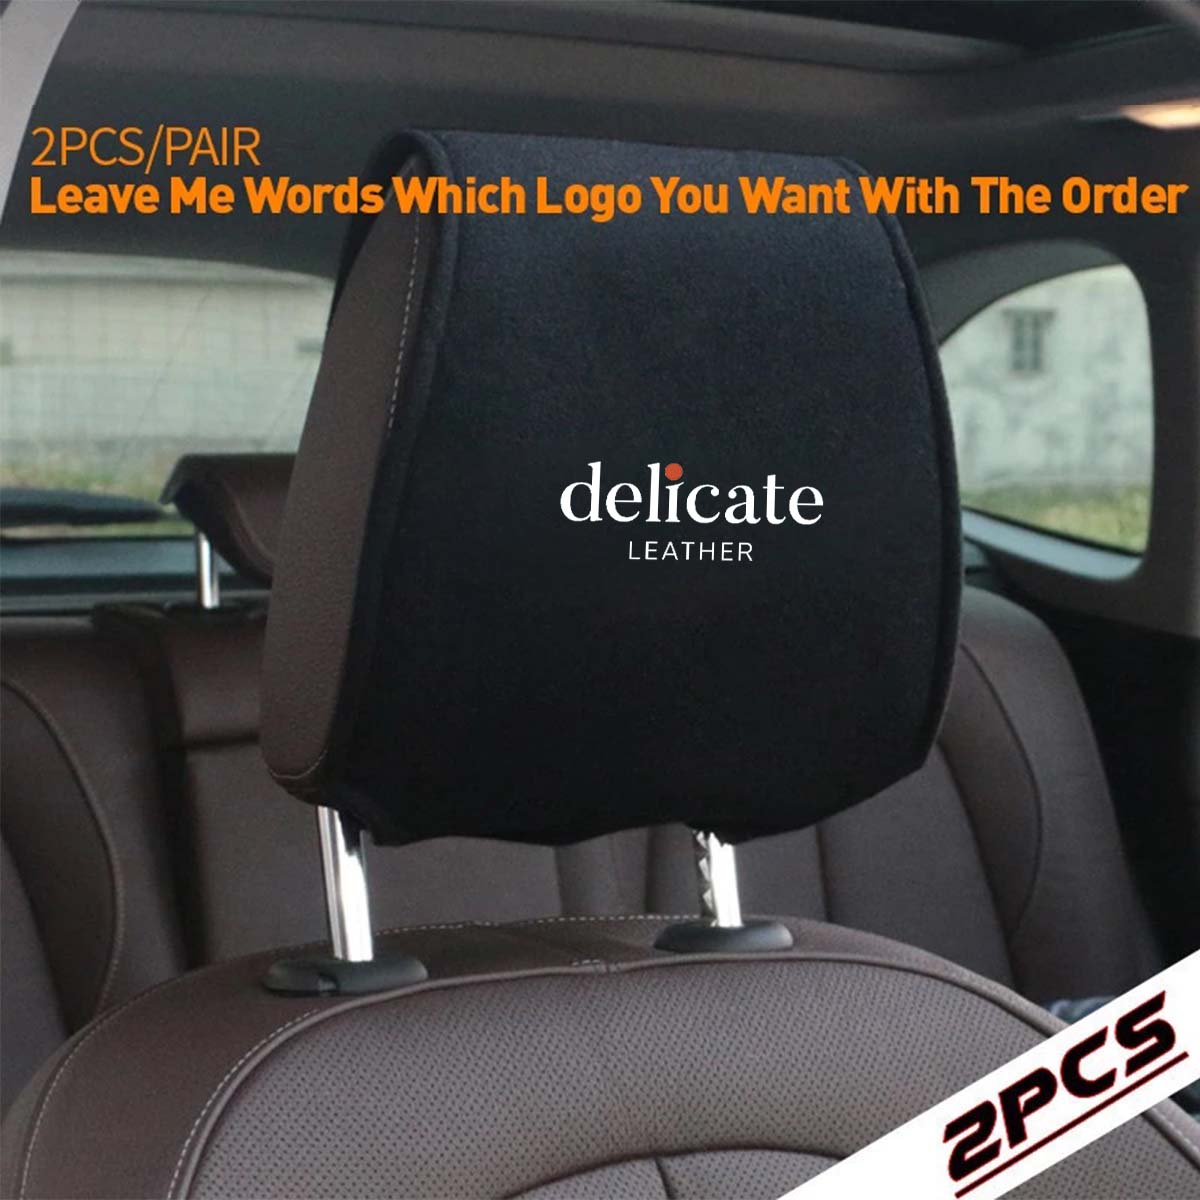 Delicate Leather Car Seat Headrest Cover Breathable Flexible Headrest Covers Velcro Auto Headrest Covers Universal Fit, Custom For Your Cars, Car Accessories FJ13998 - Delicate Leather